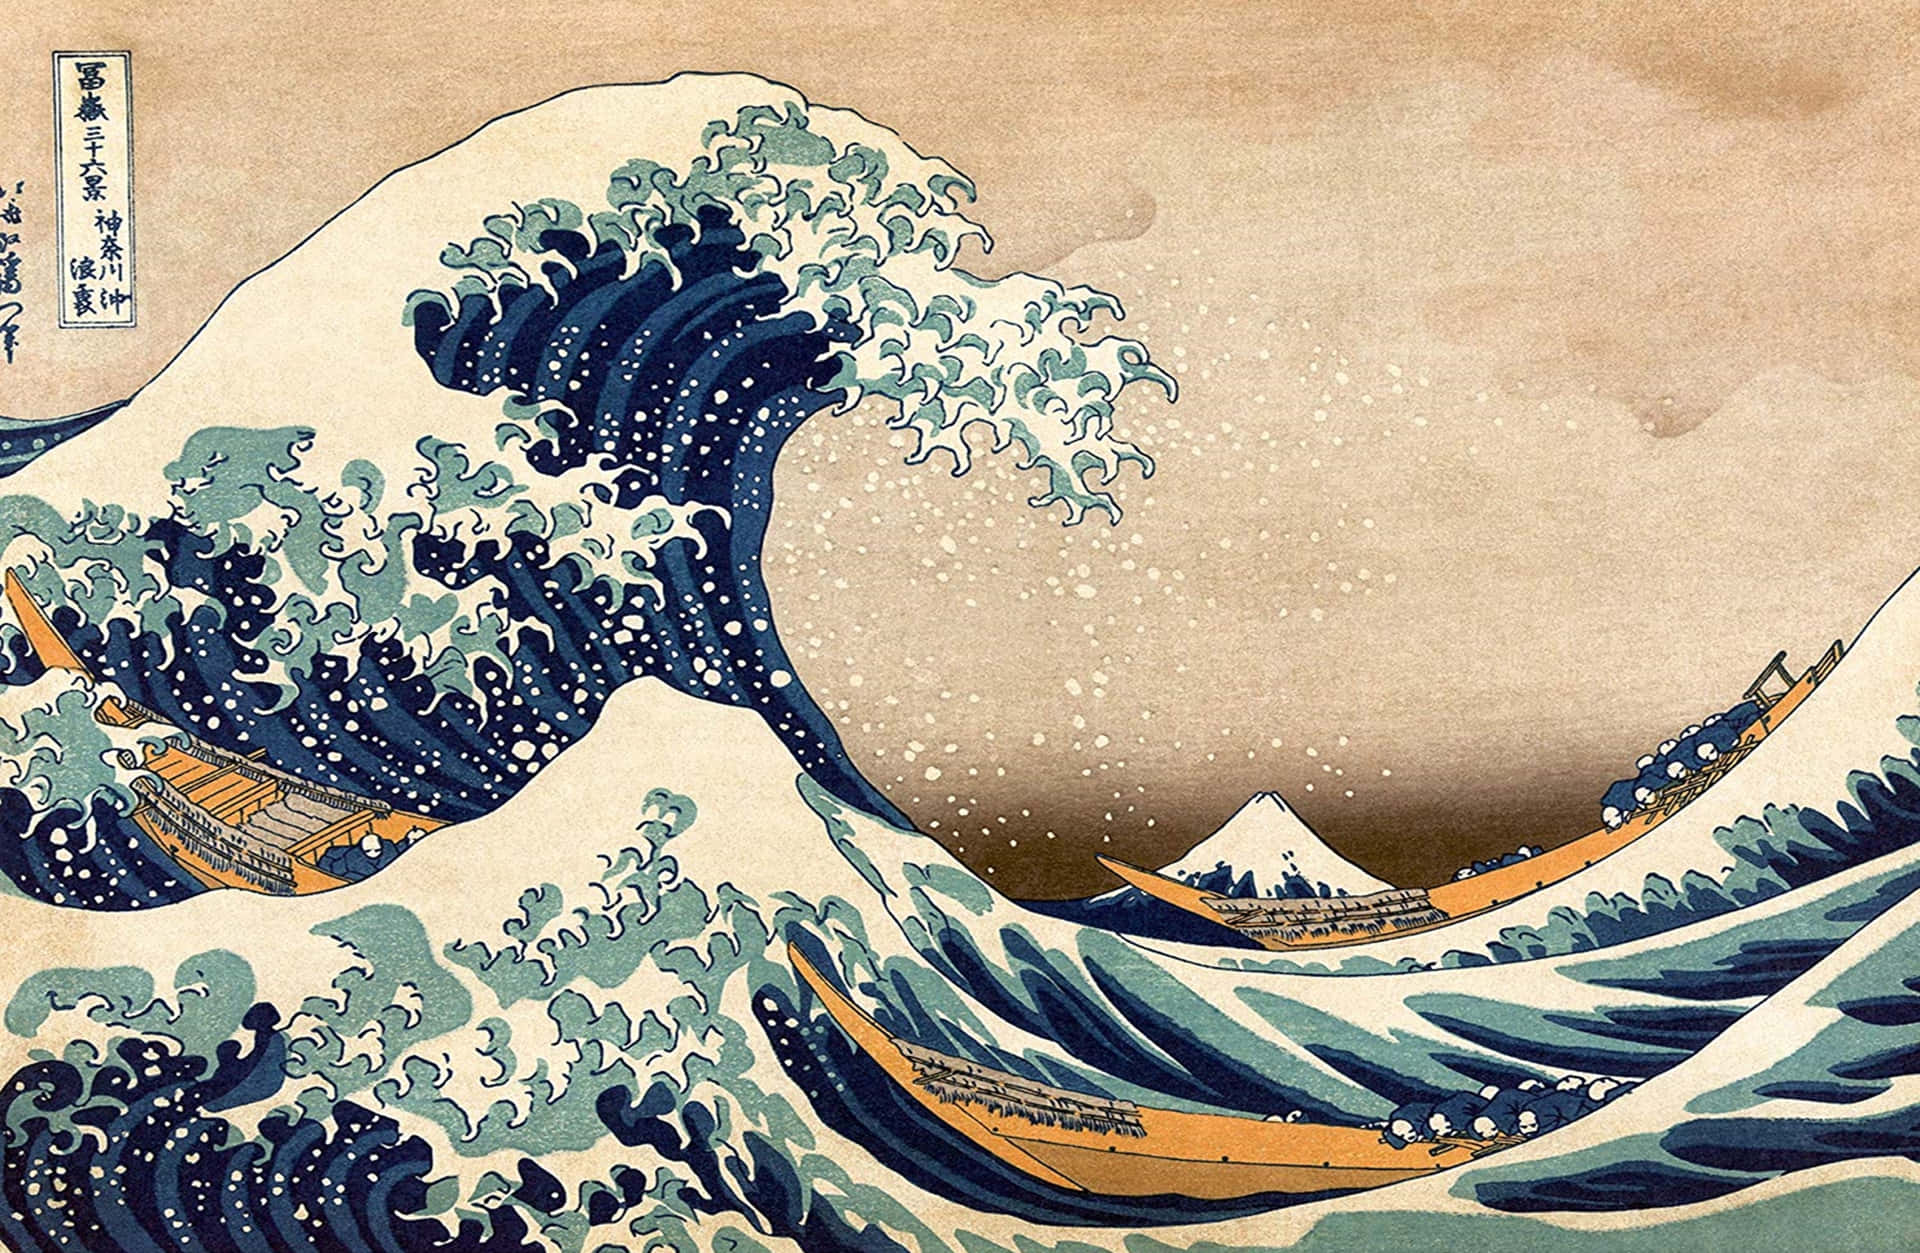 Image  Japanese Hokusai Woodblock Print of a Tsuami Wave (or "The Great Wave") Wallpaper